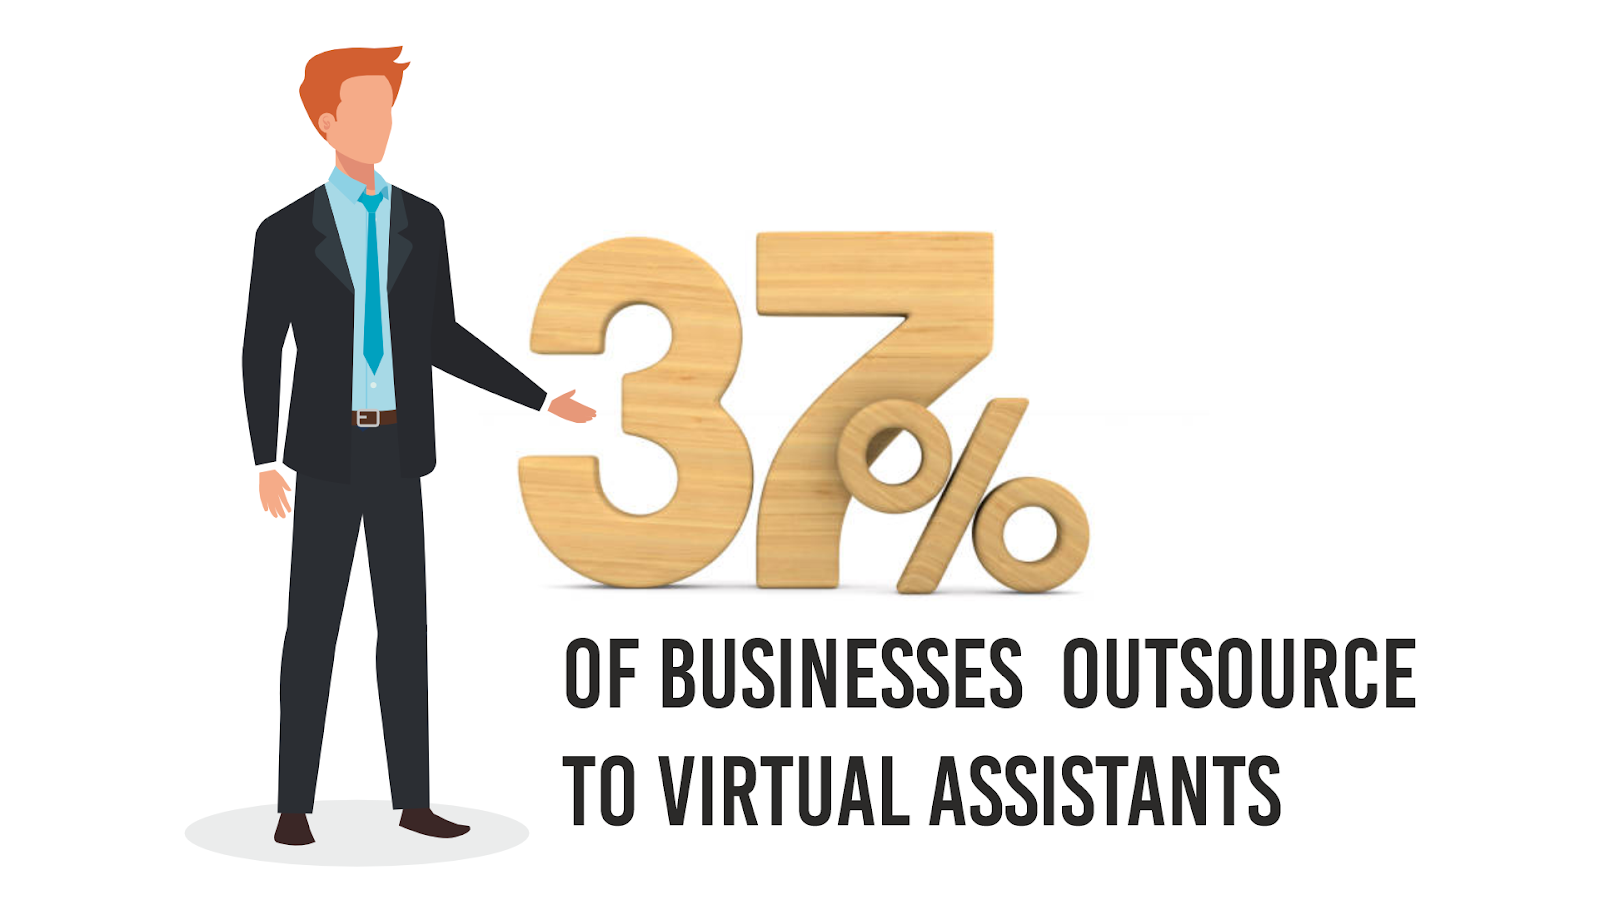 Infographic depicting 37% of businesses outsource to virtual assistants